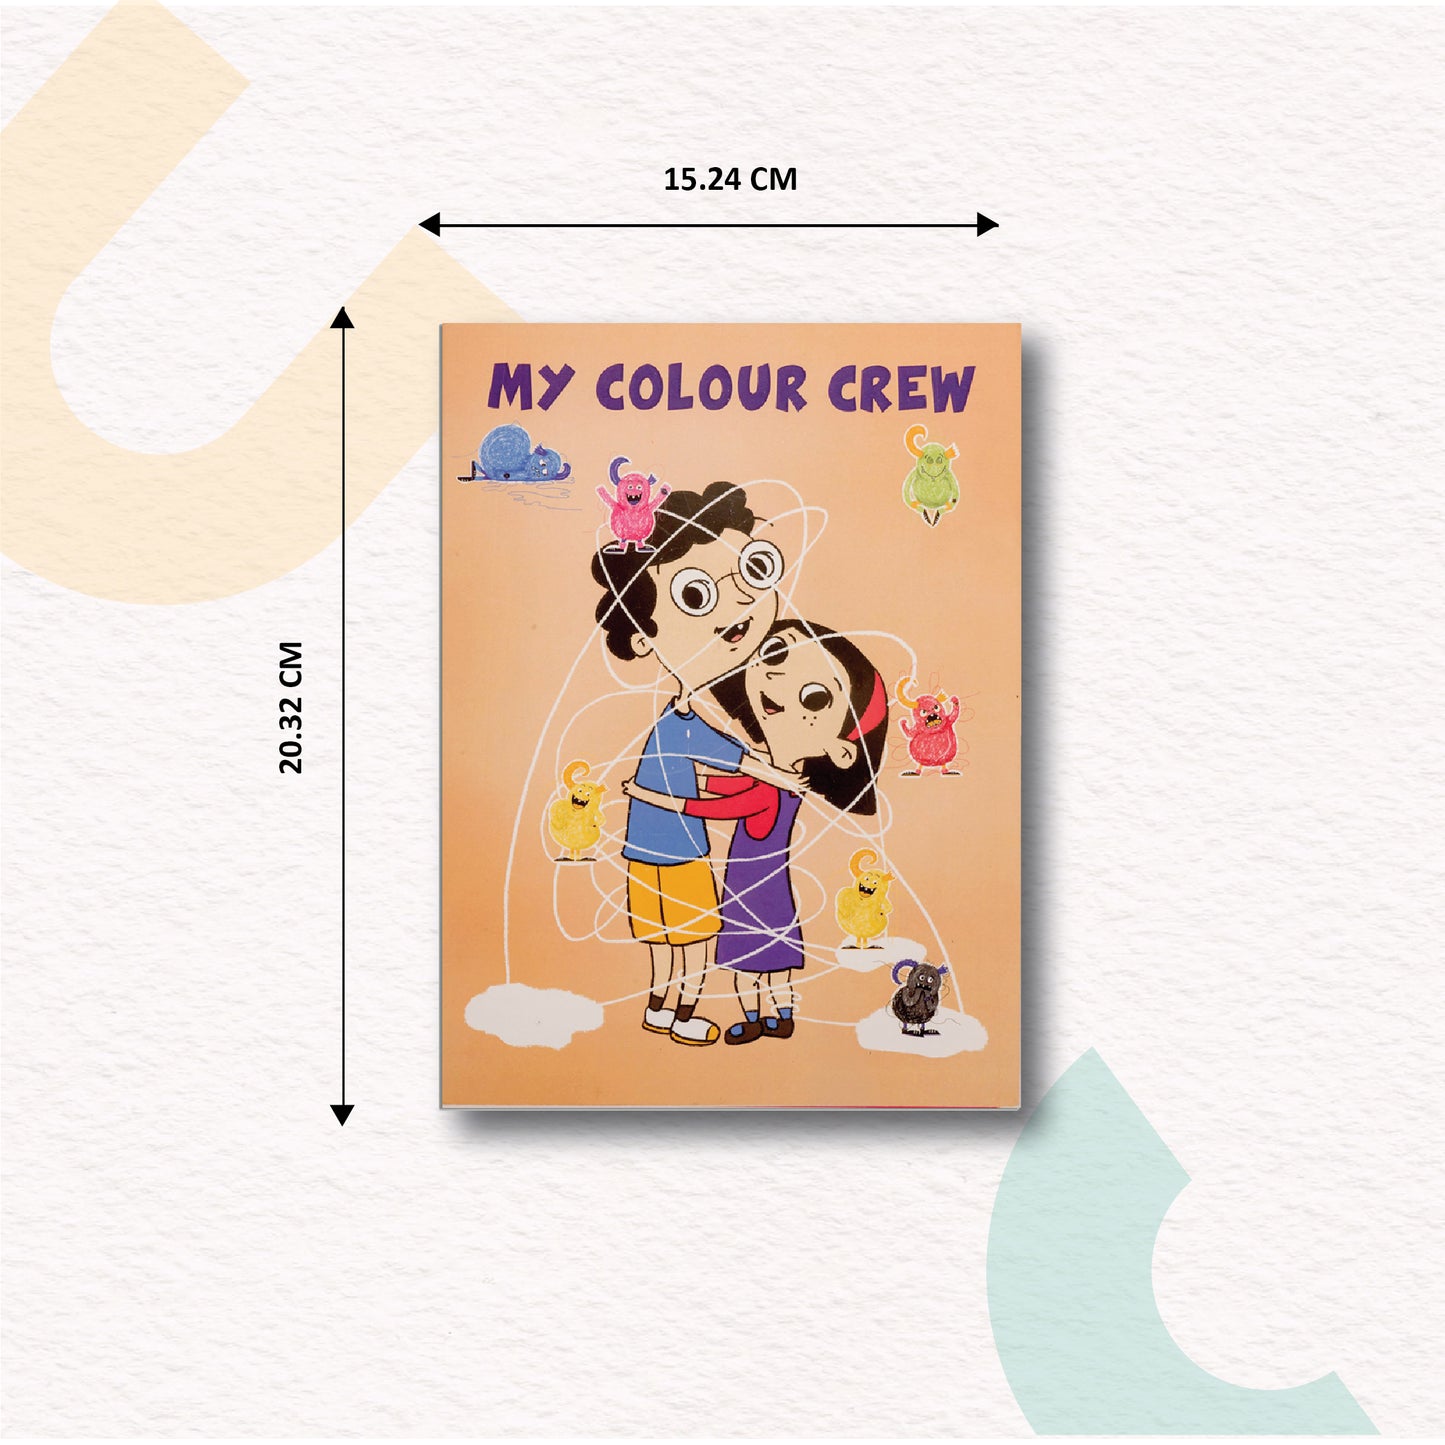 My Colour Crew: Fold Out Book on Emotions & Colours